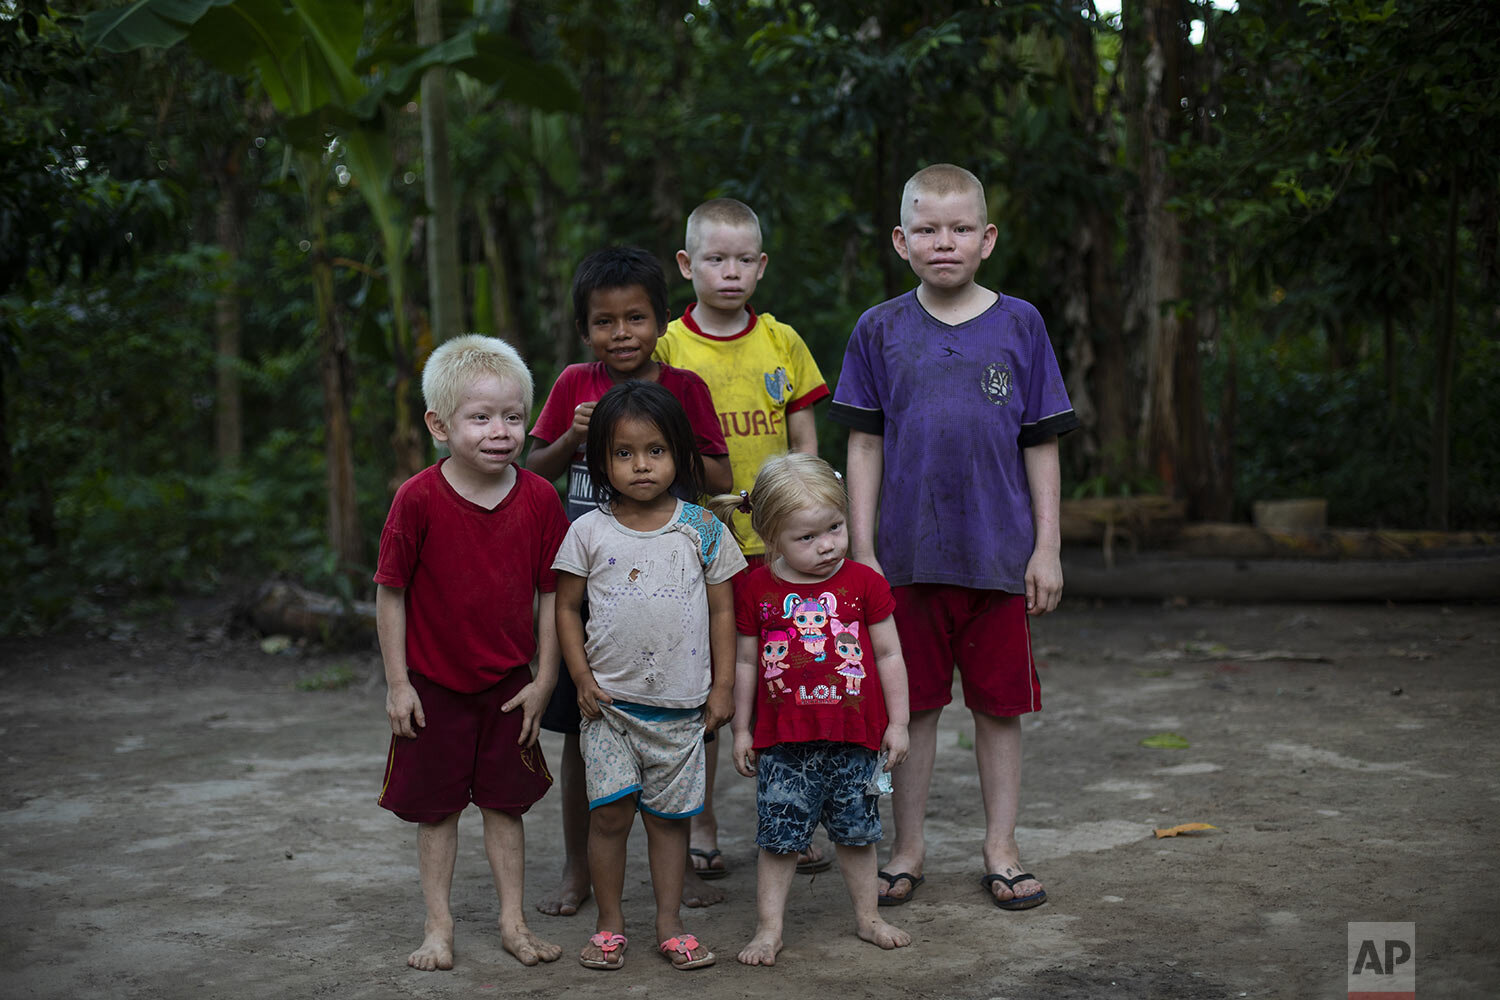  Siblings from left to right; Ender, 6, Gisell, 4, Diere, 9, Baker, 11, Ashley, 3, Watson, 12, pose ffor a photo near their home in Palestina, in Peru’s Ucayali region, Wednesday, Sept. 30, 2020. Their 36-year-old father Ender Rengifo told The Associ